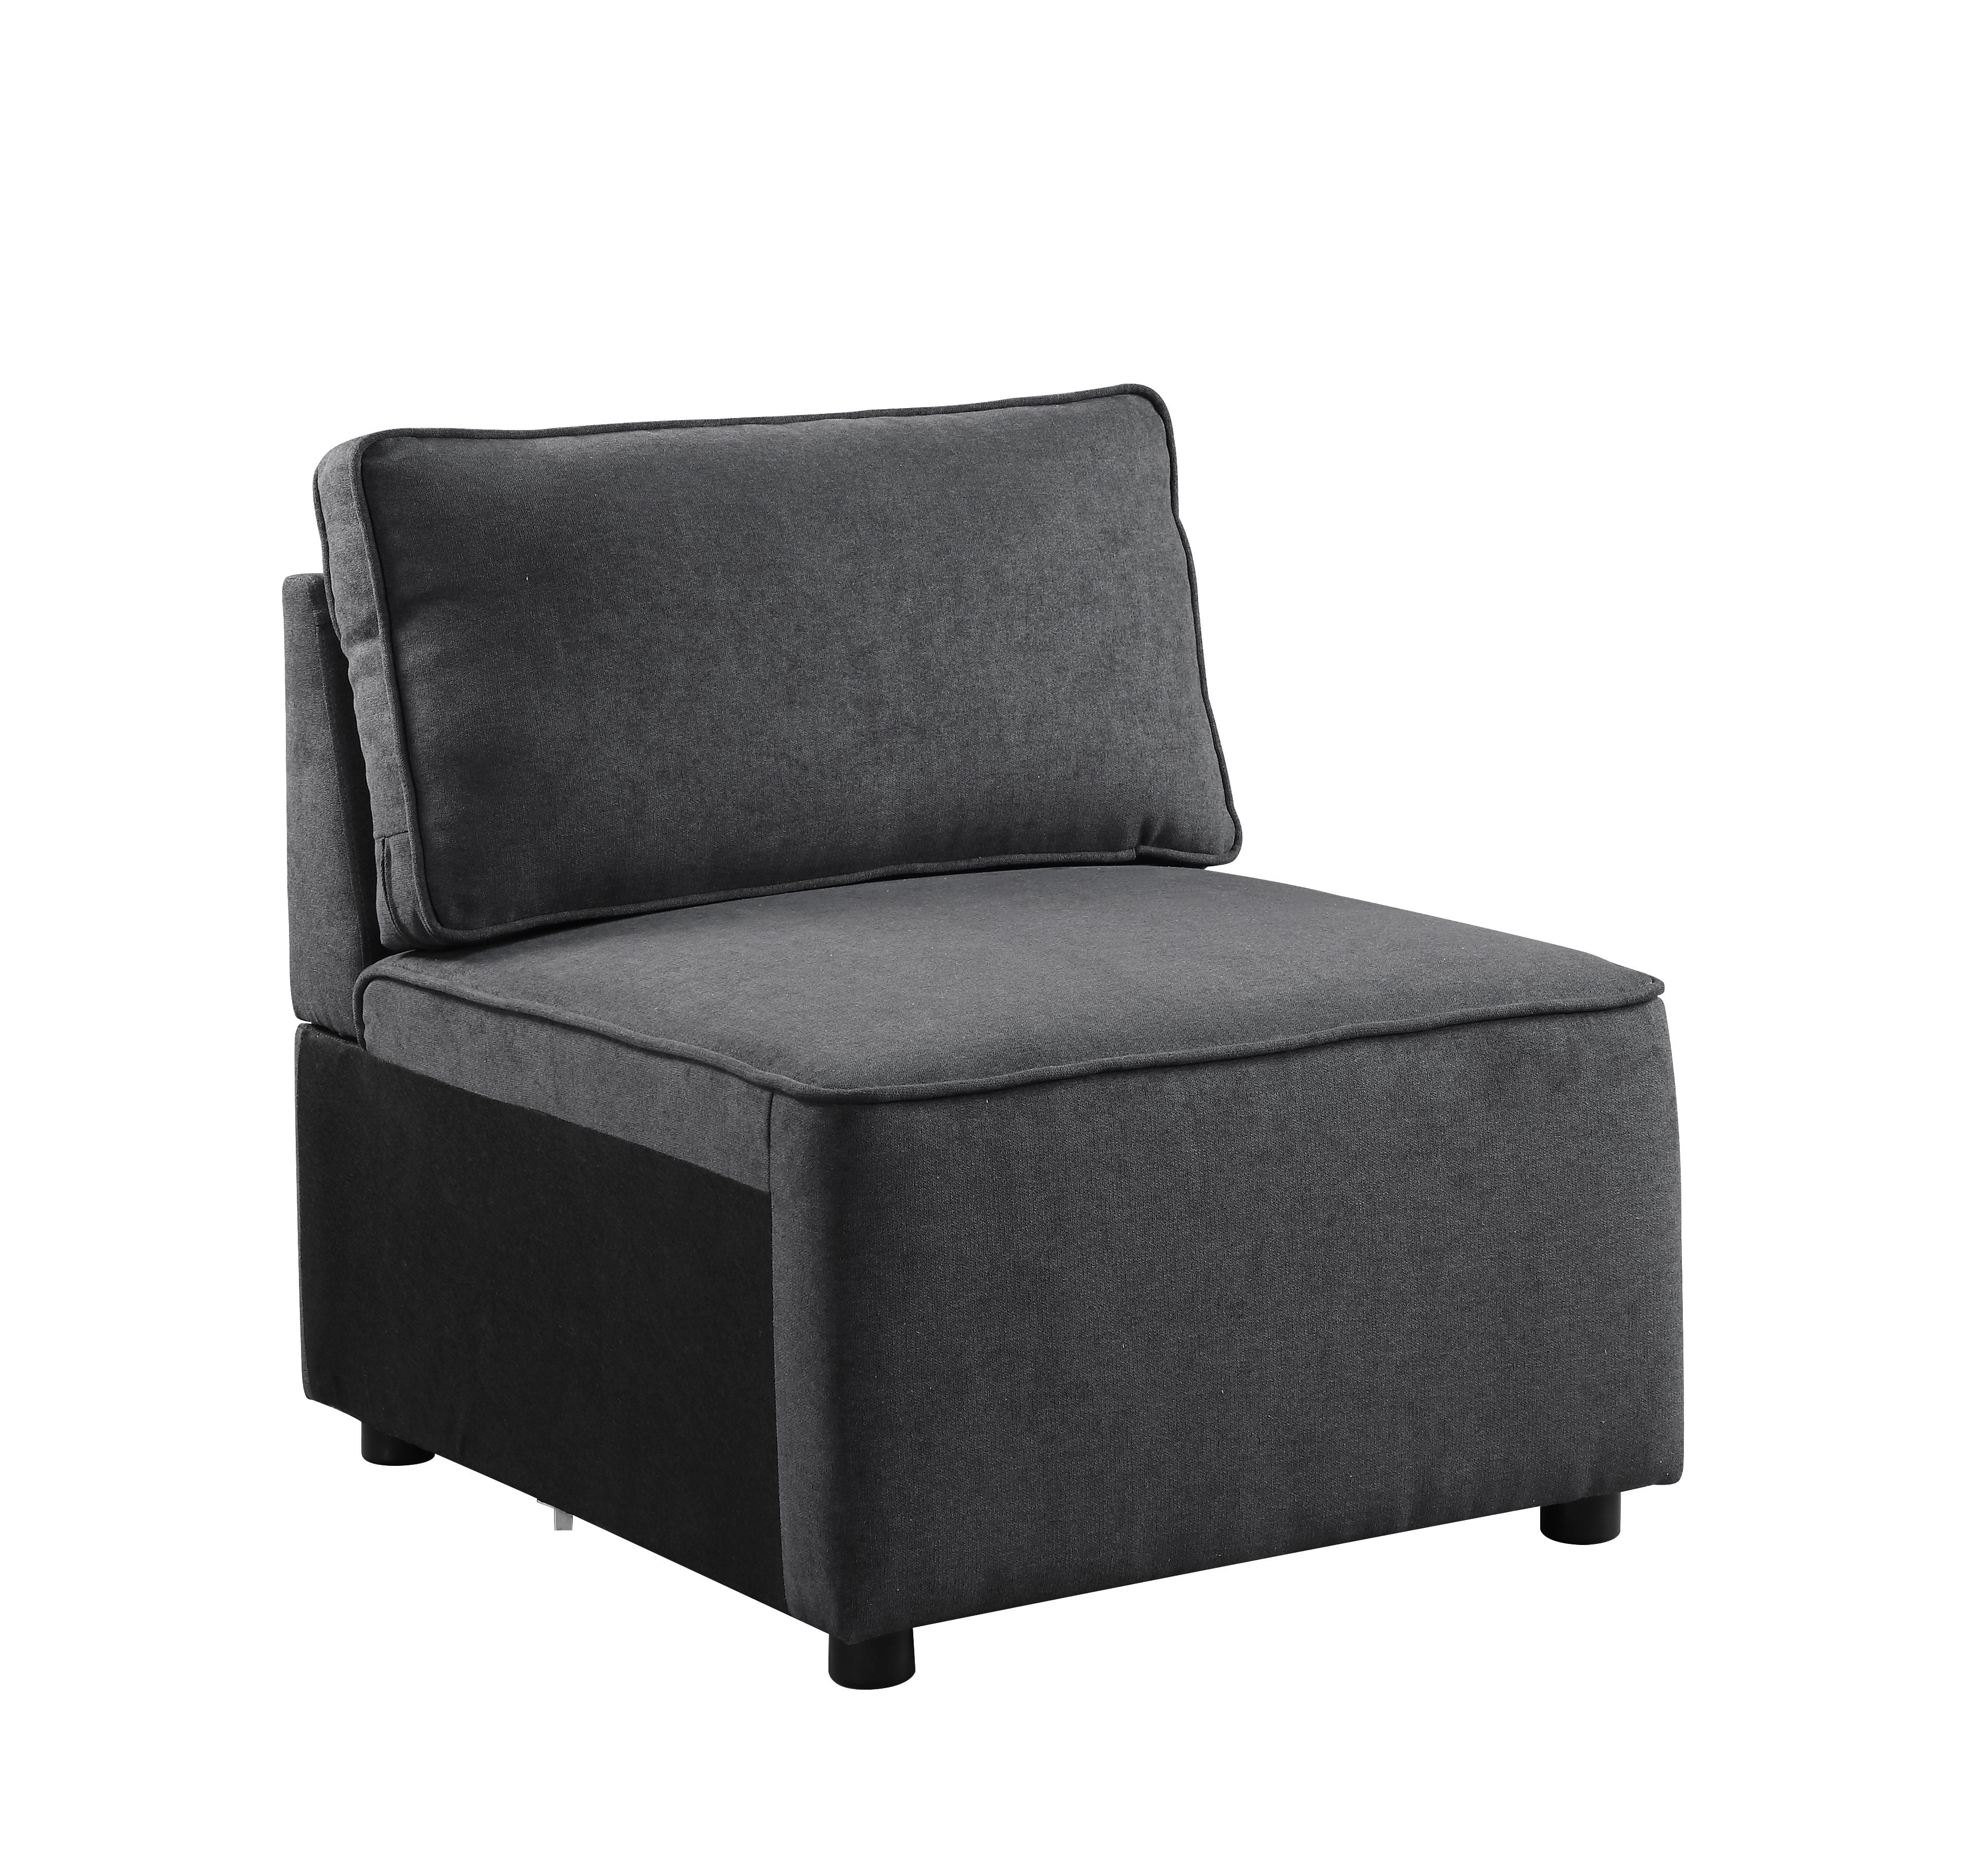 Picture of Acme Furniture 56873 28 x 33 x 29 in. Silvester Modular Armless Chair, Gray Fabric